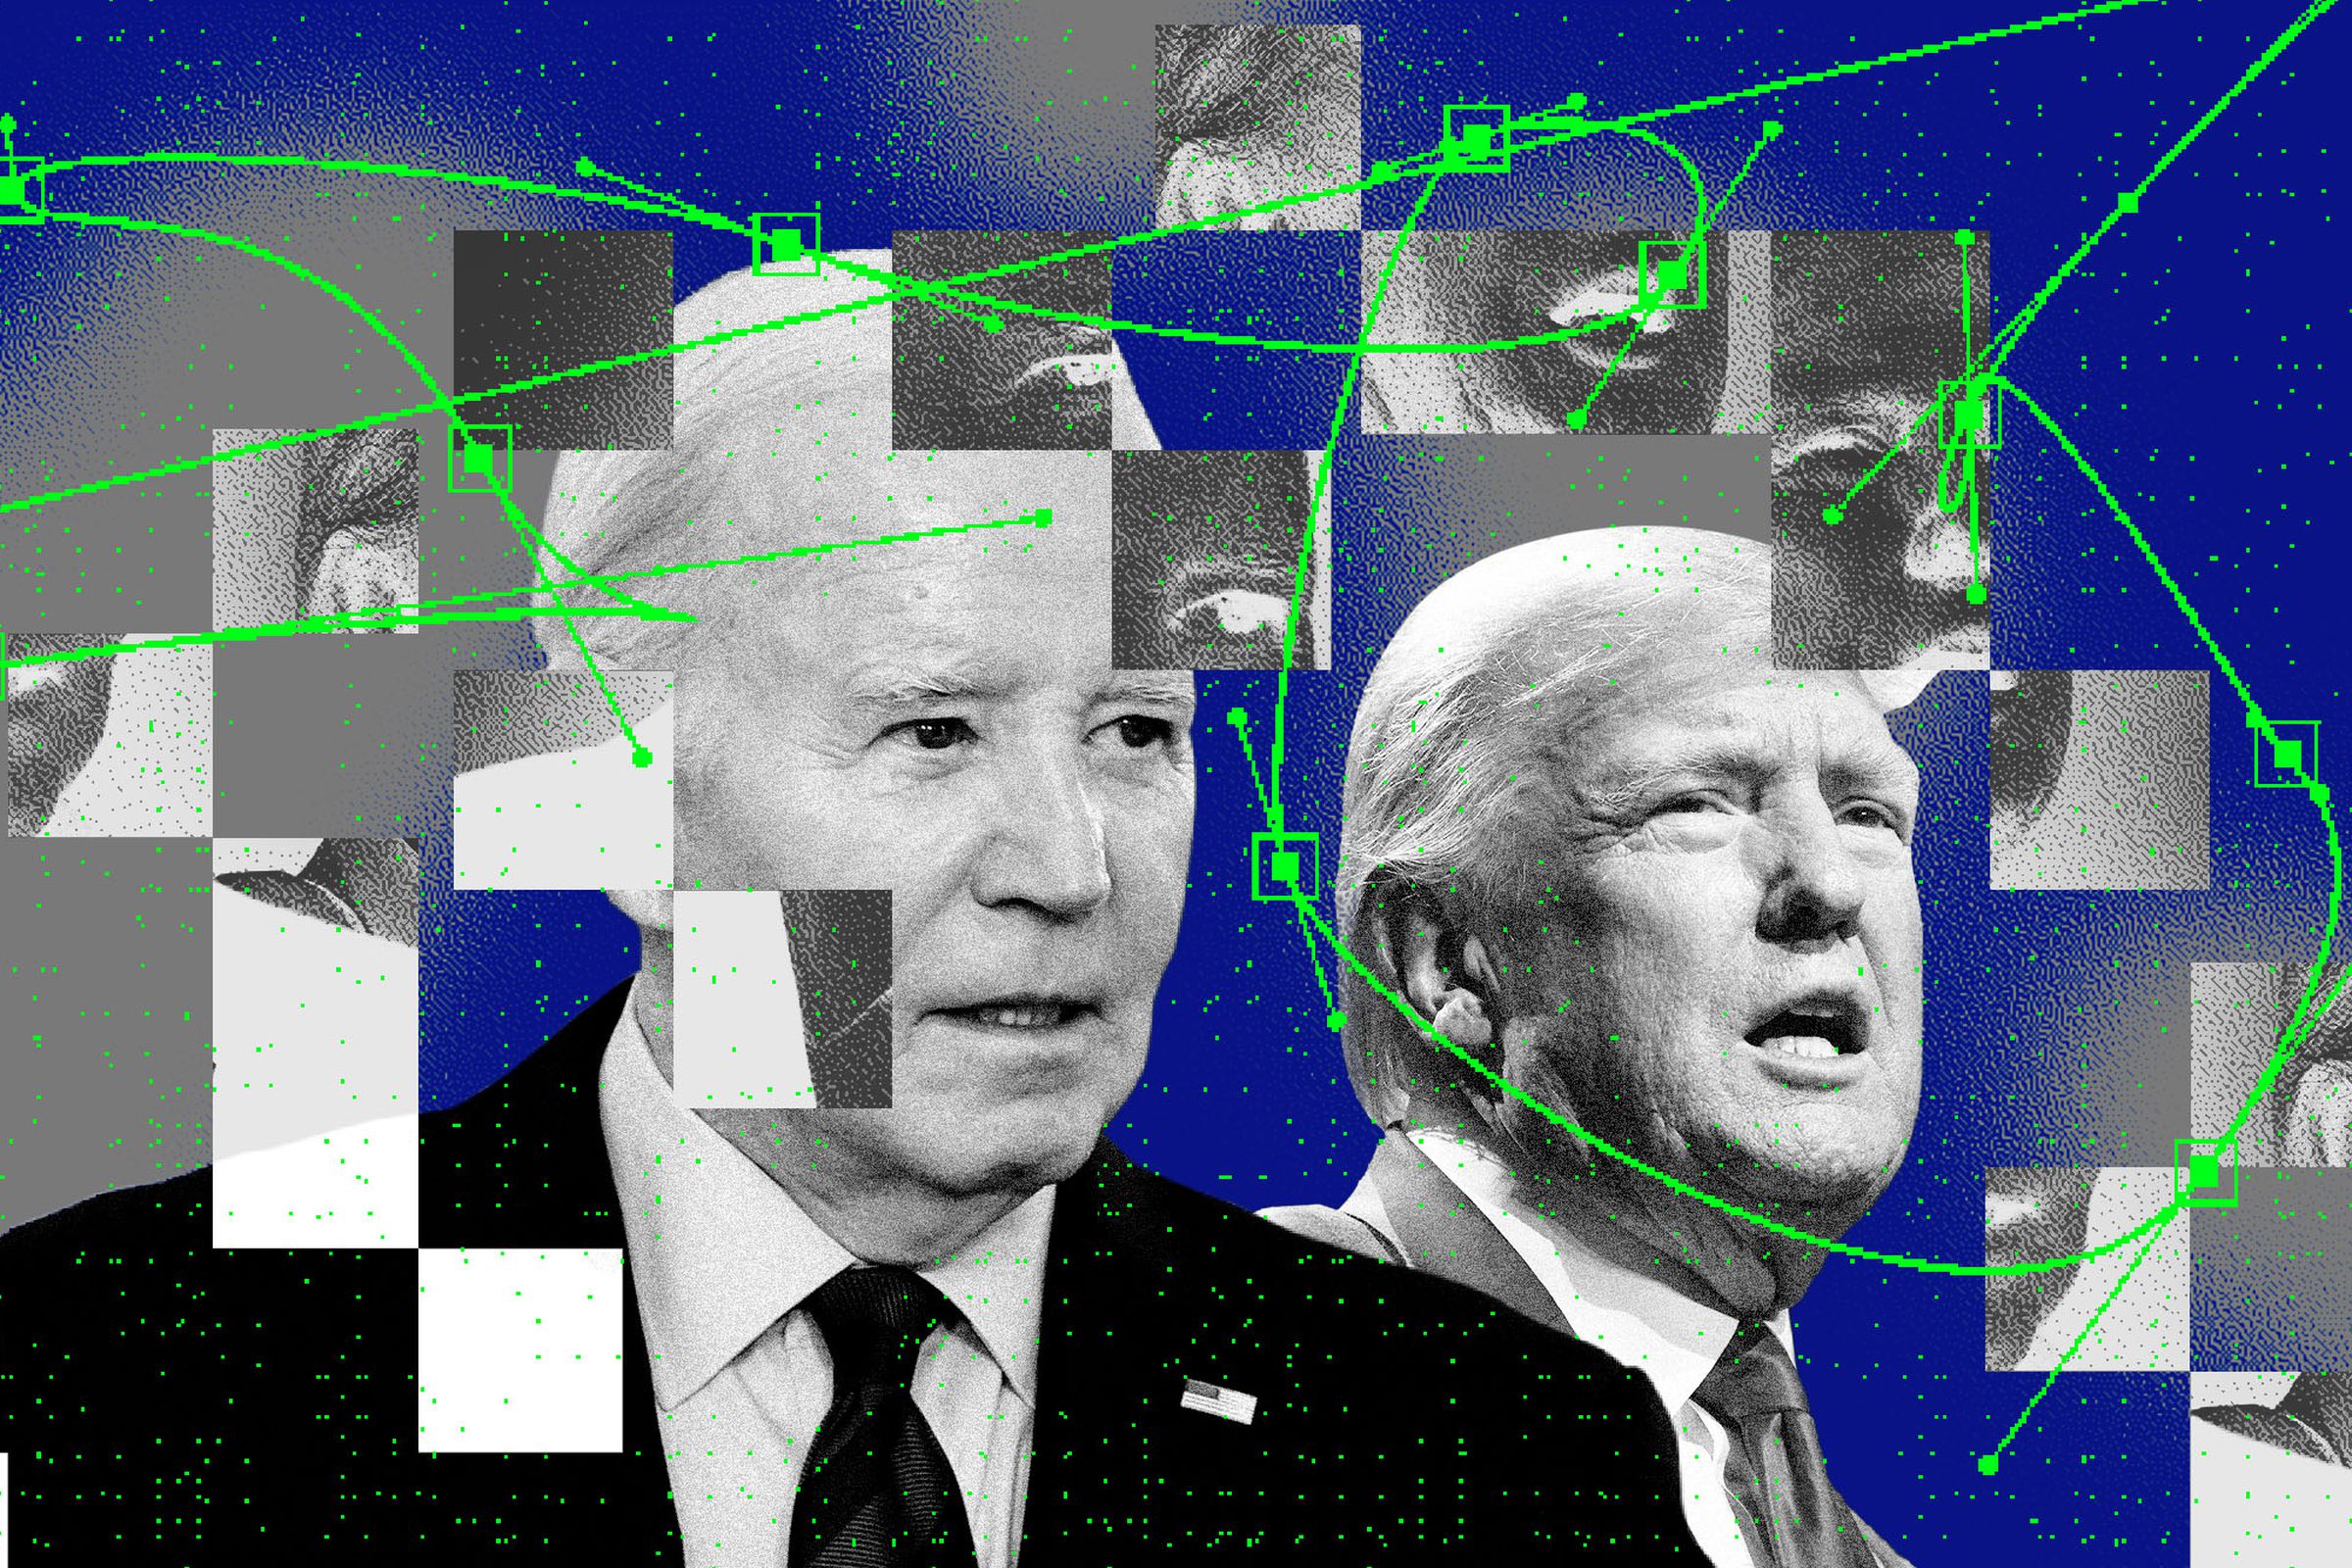 Photo illustration of Joe Biden and Donald Trump‘s faces being used for deep fake videos.